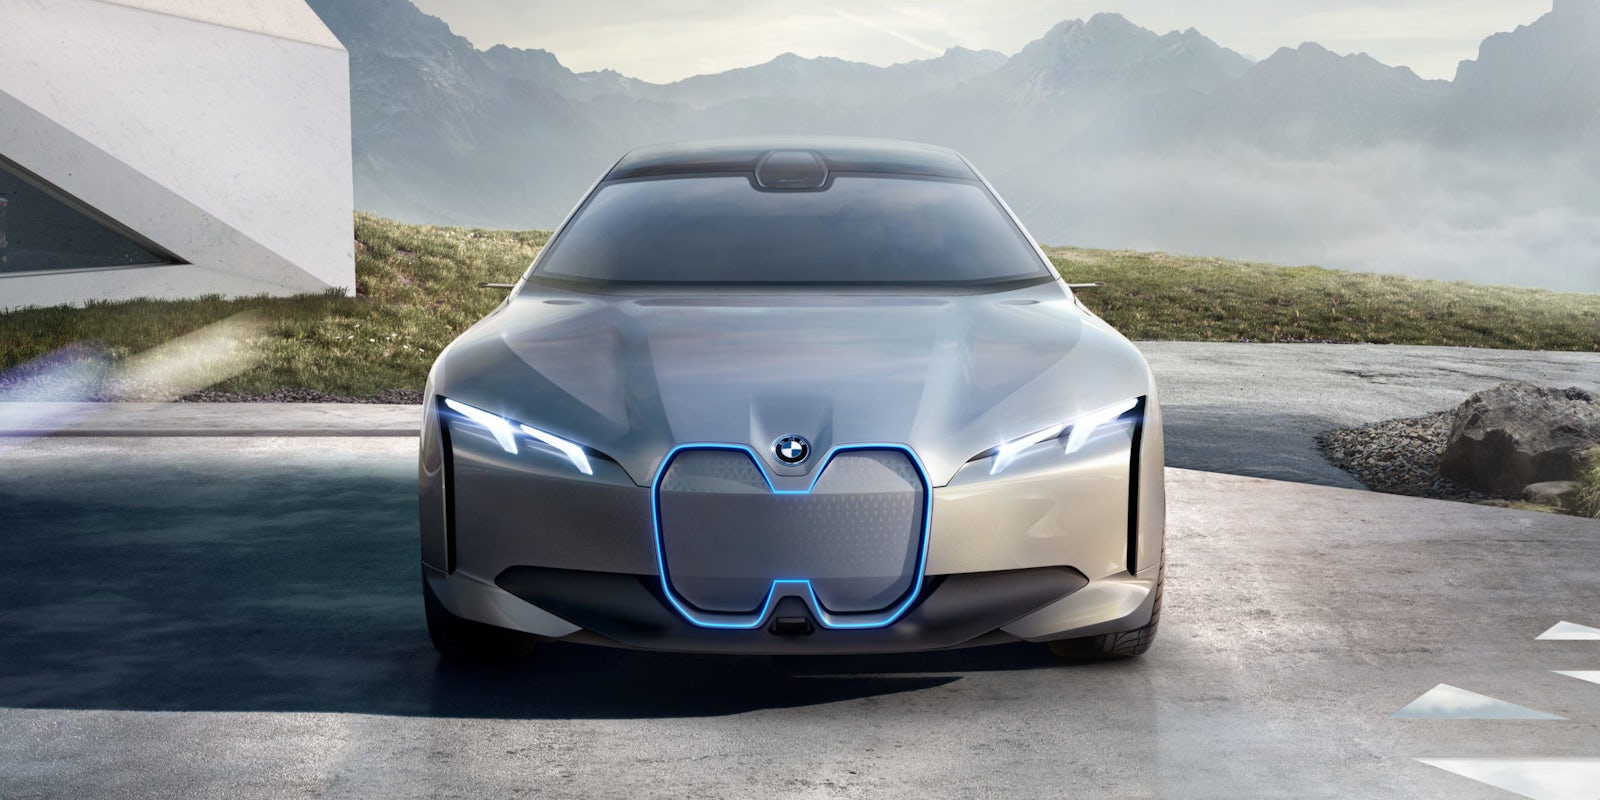 The Wait Is Over! Introducing The BMW i4 And Its Features